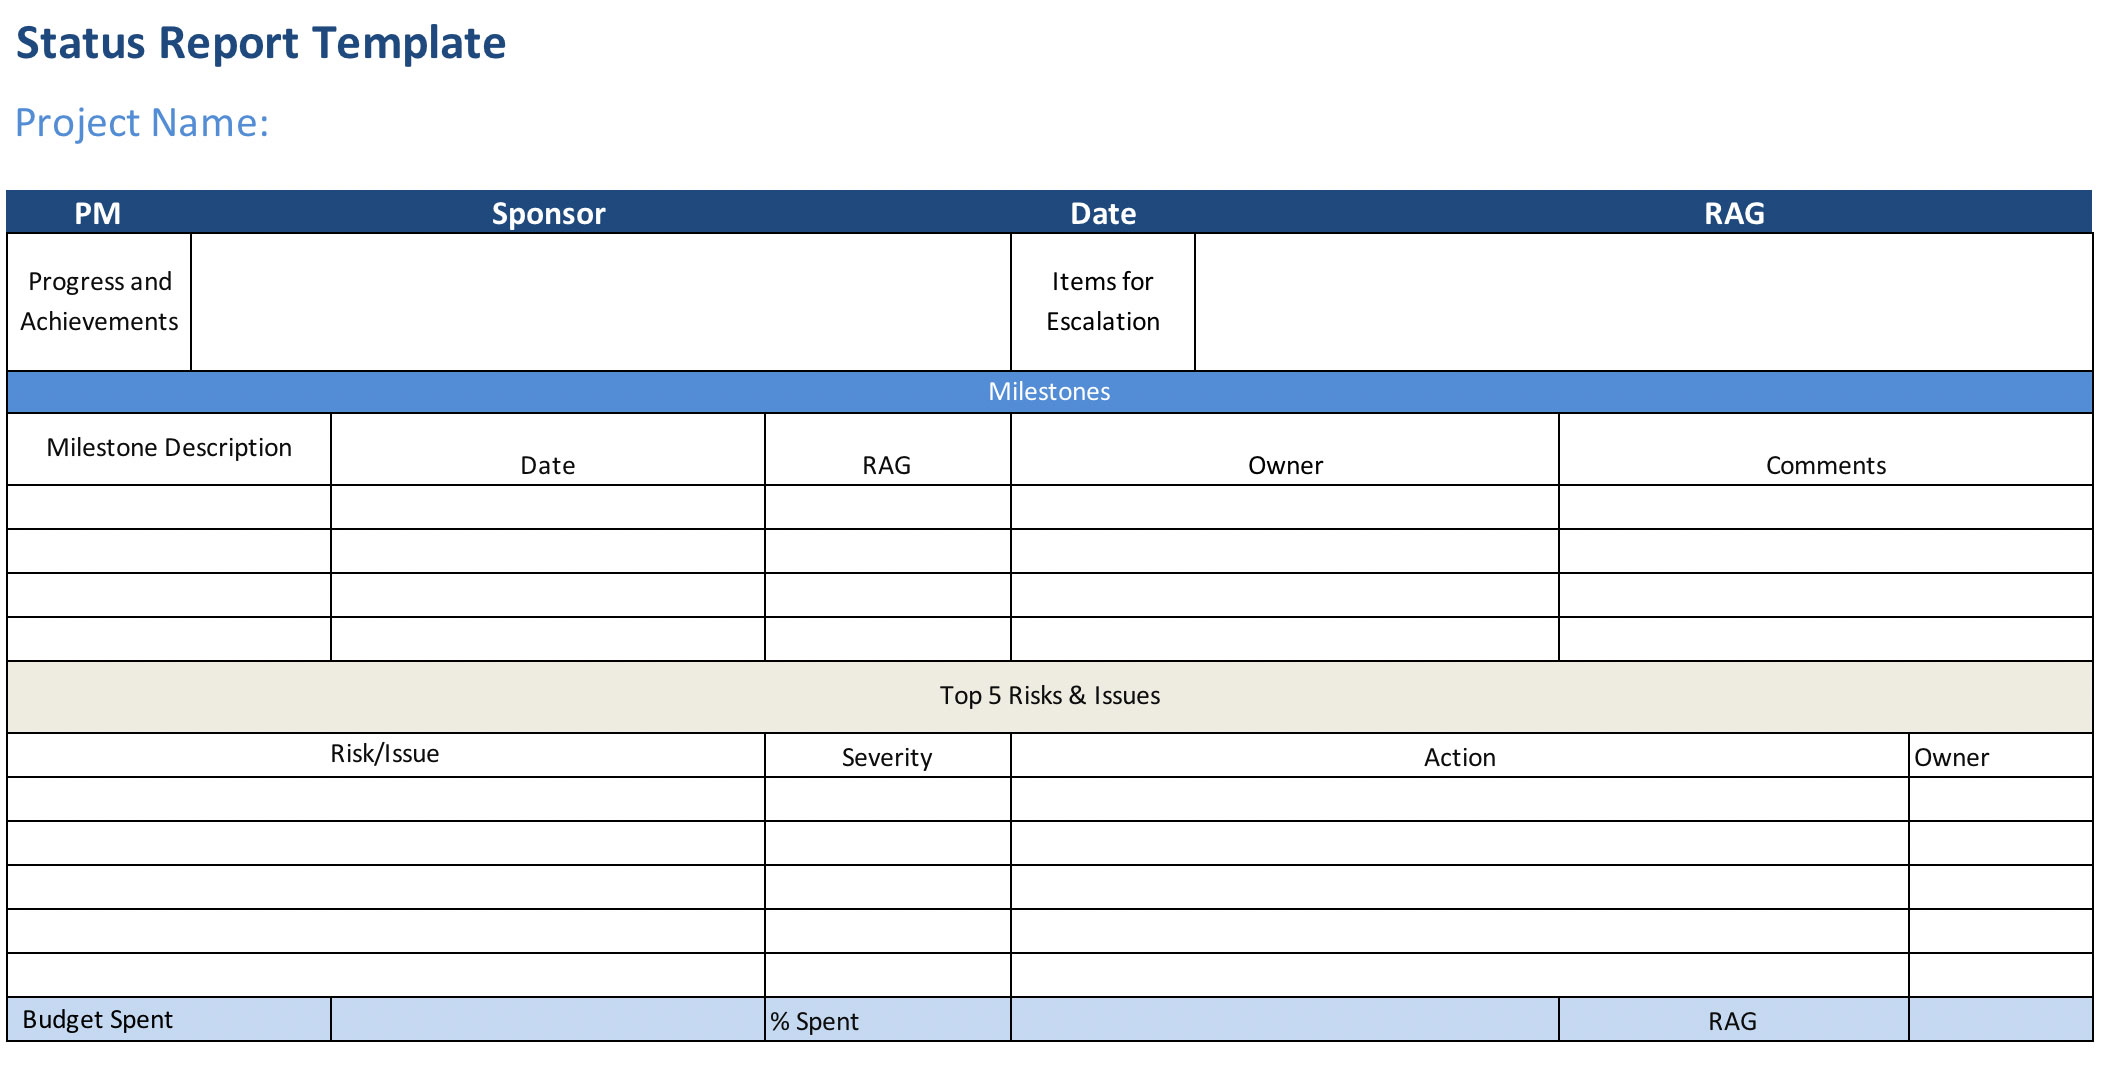 20 Free Project Report Templates (Weekly Status Report Included) Regarding Simple Project Report Template